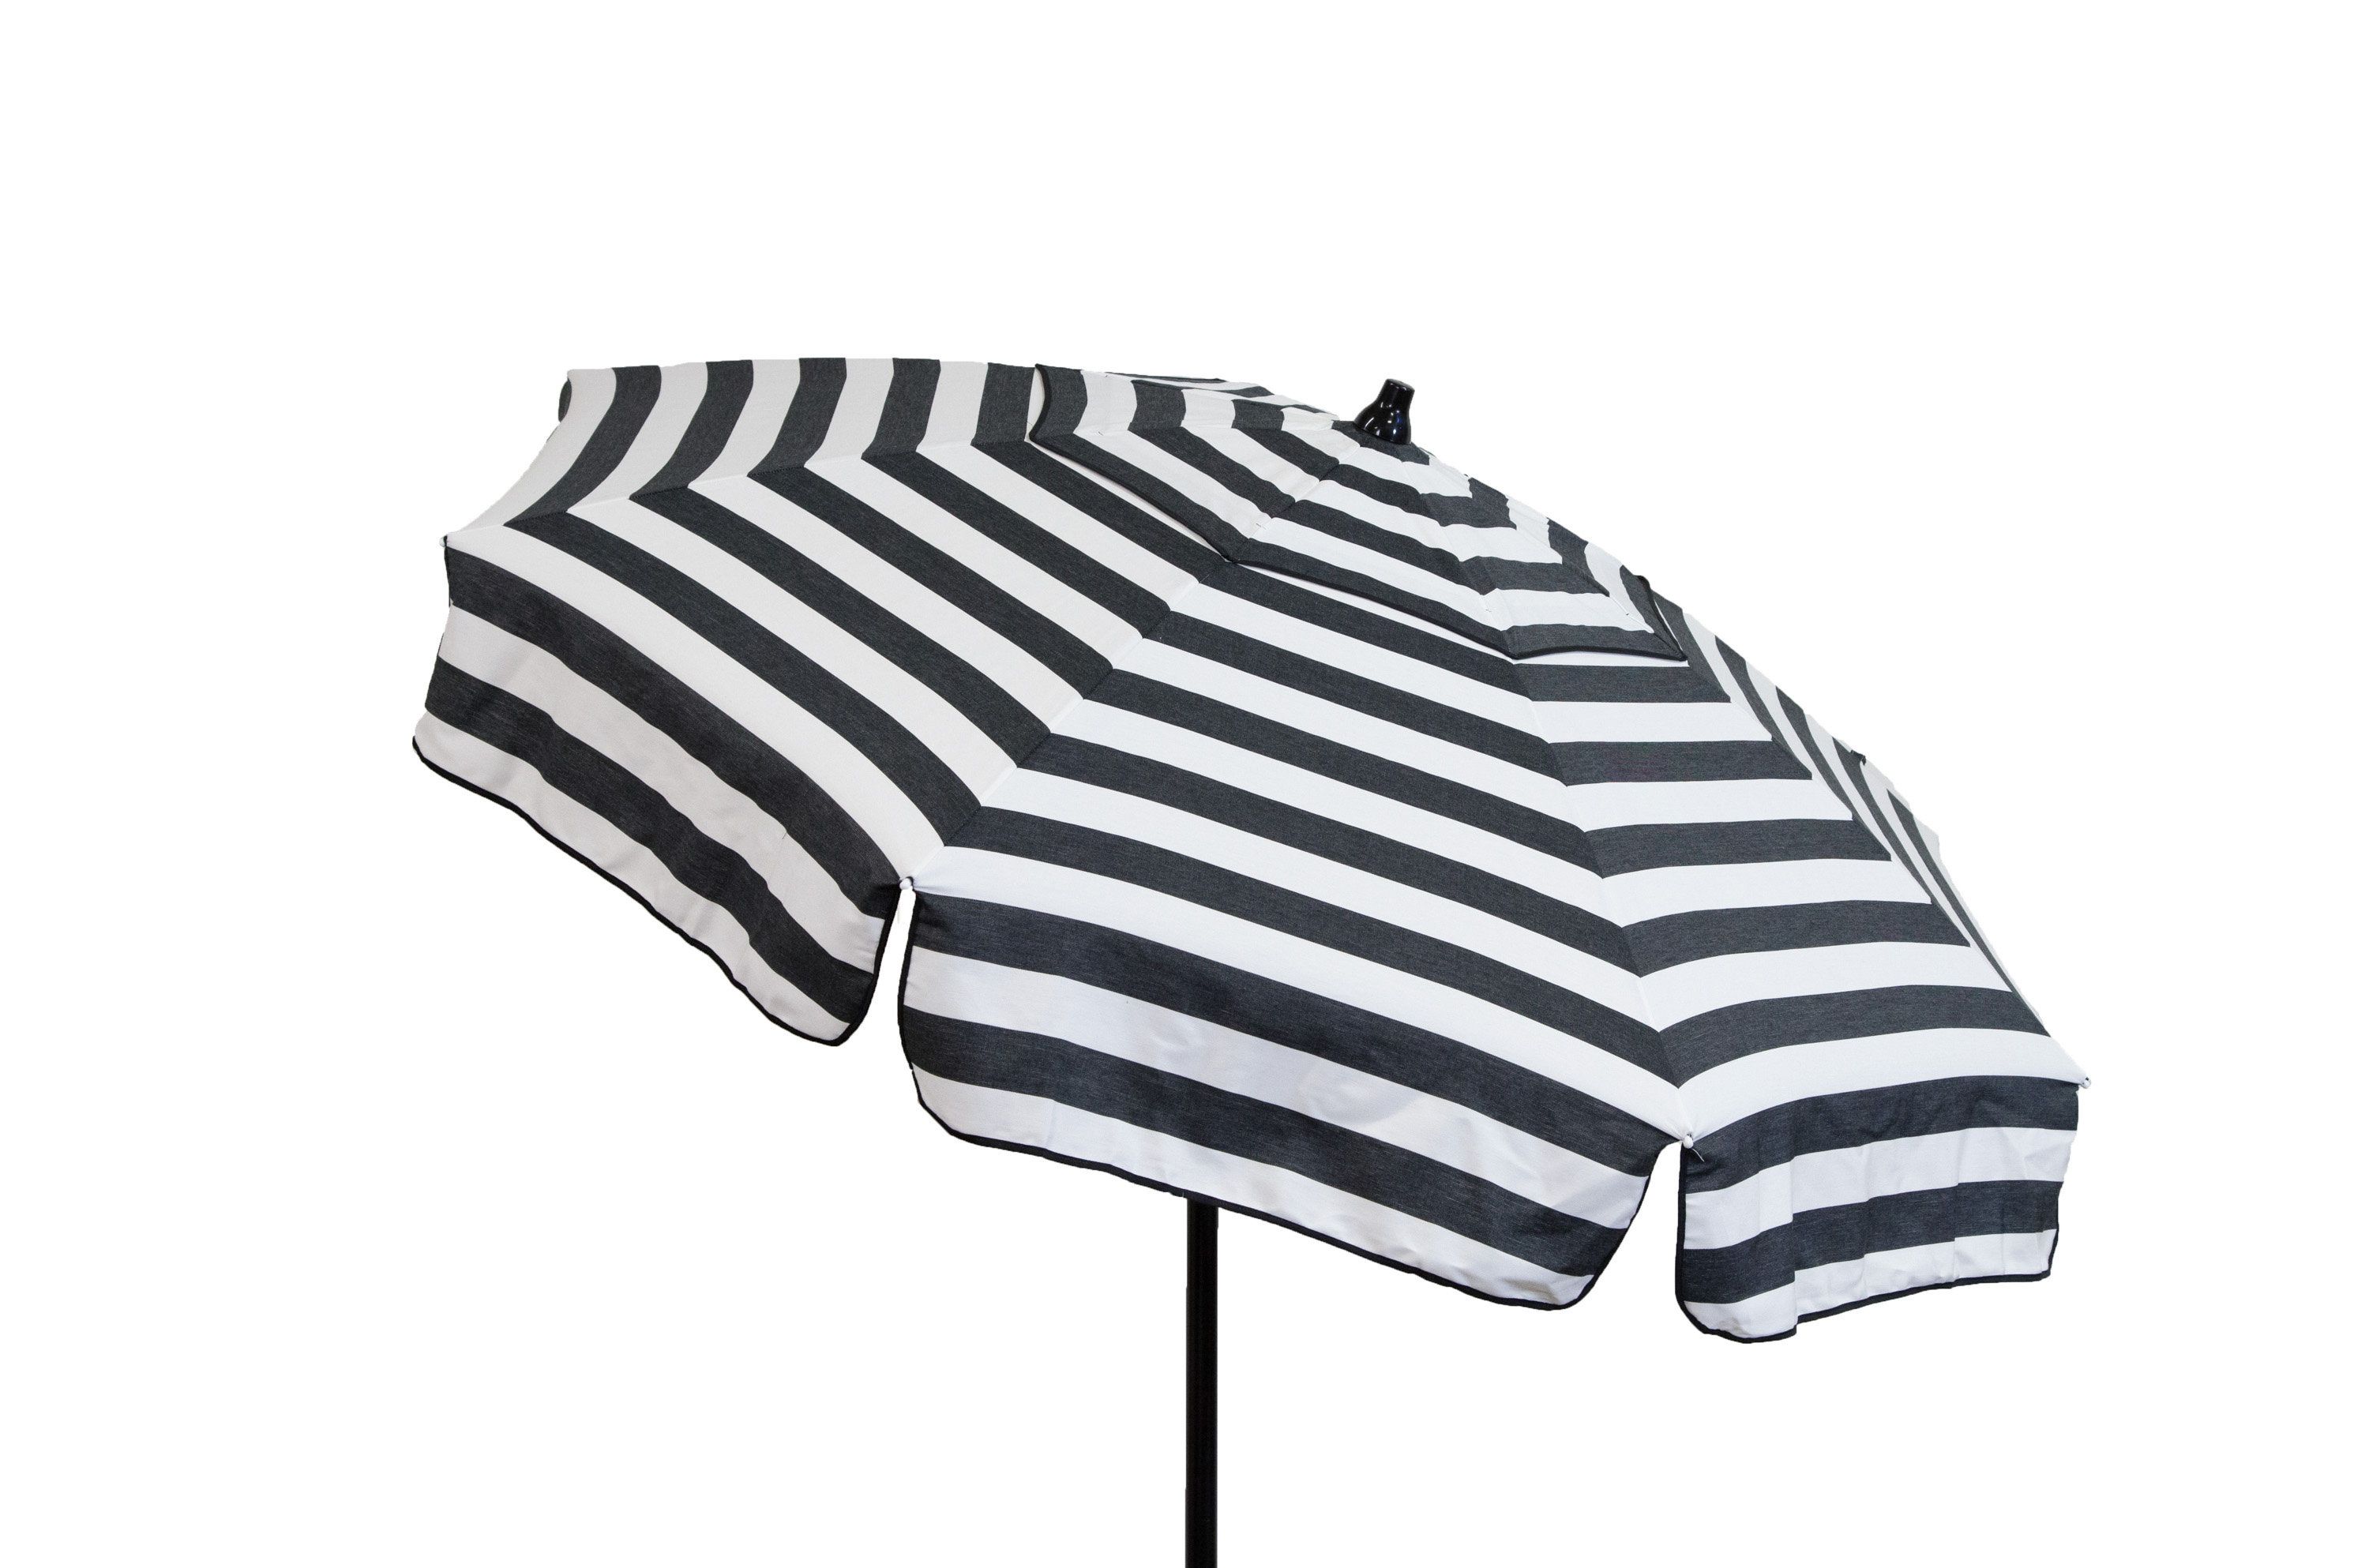 Kerner Steel Beach Umbrellas Intended For Most Recently Released Italian 6' Drape Umbrella (View 12 of 20)